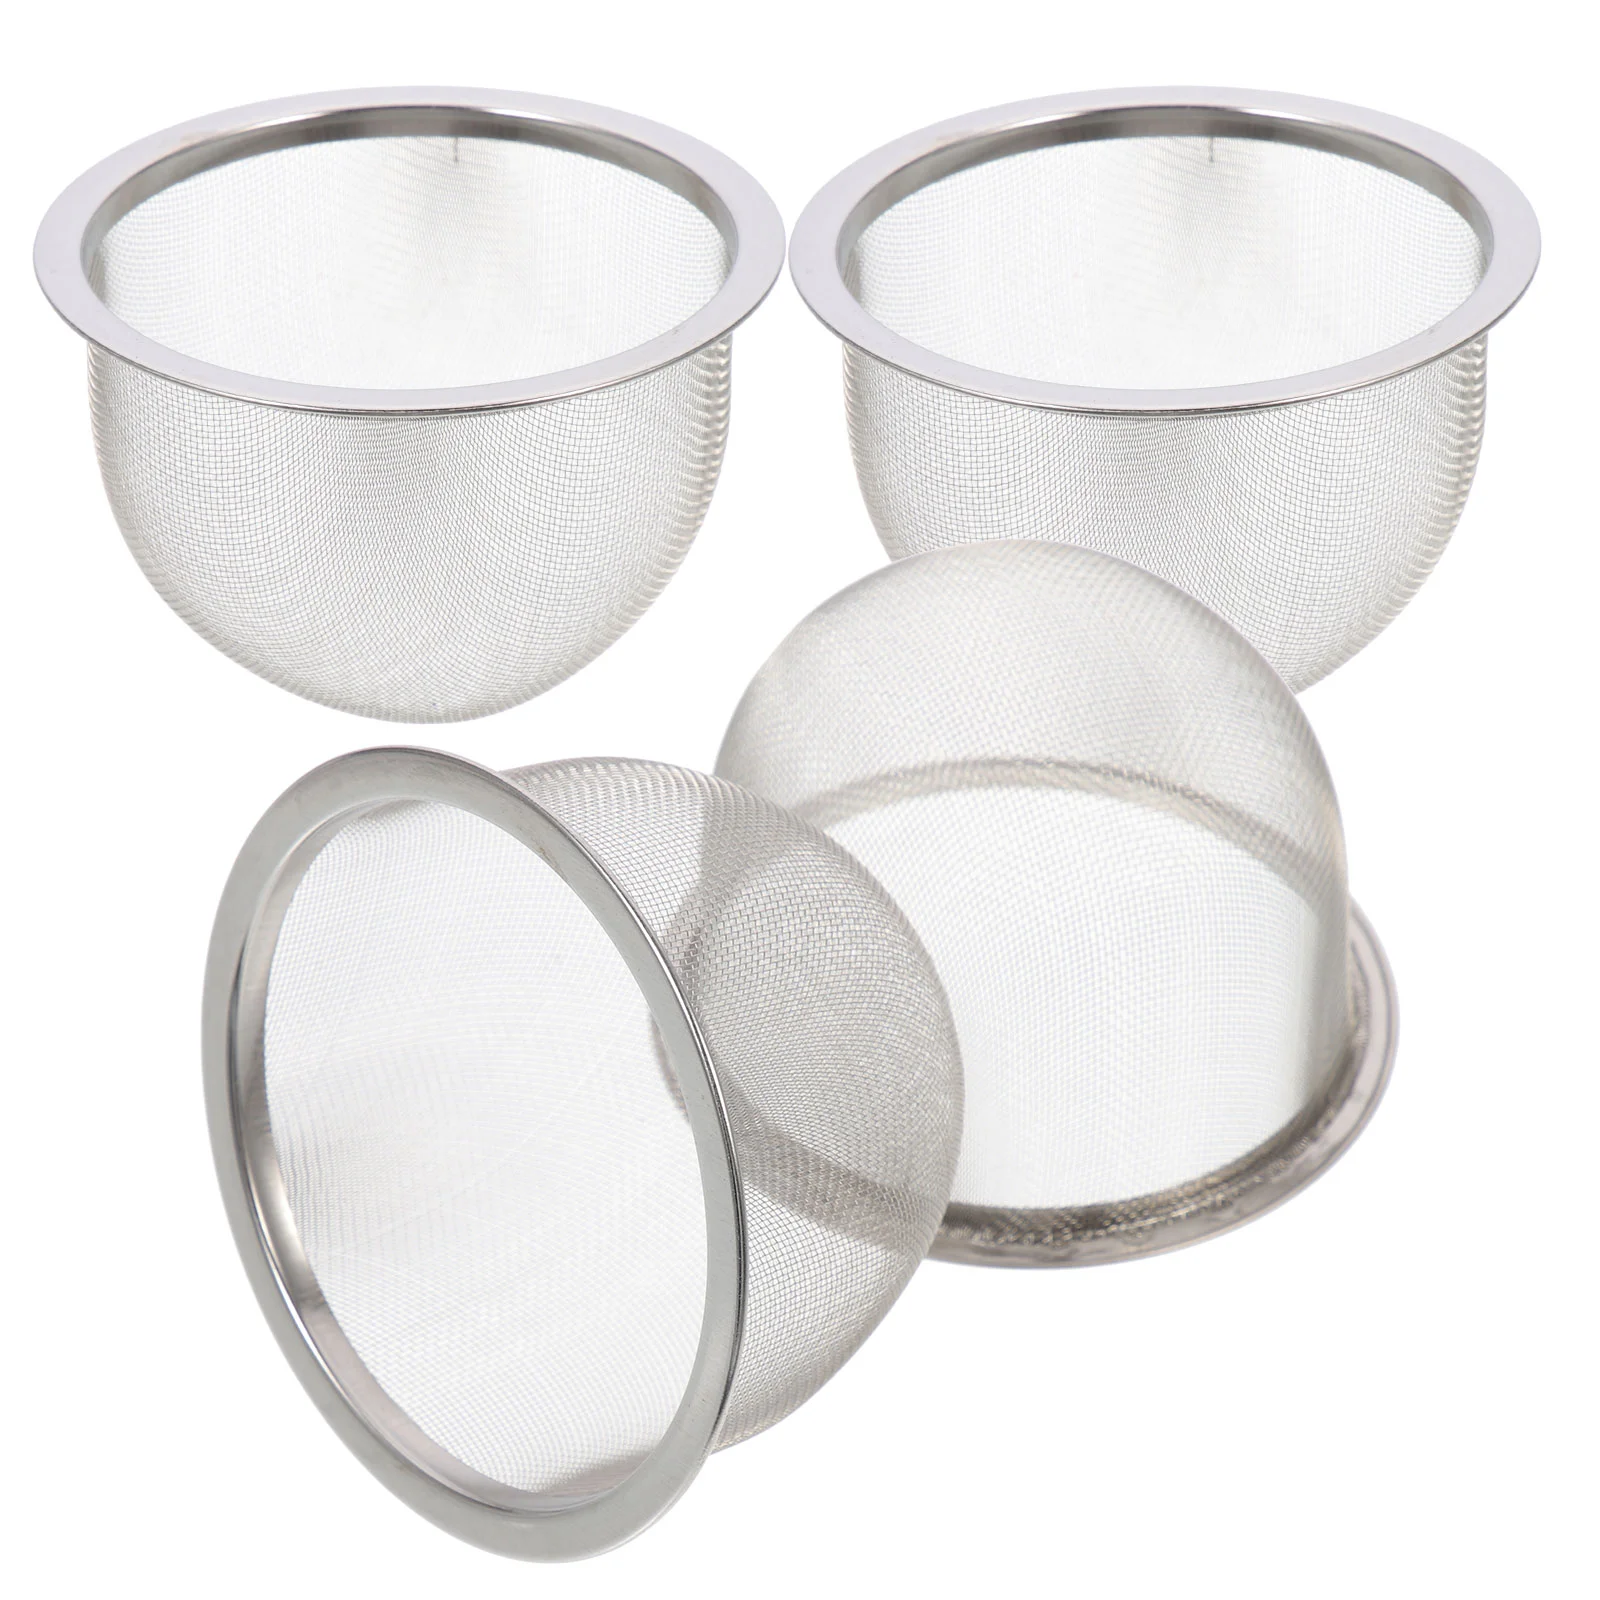 

4 Pcs Teapot Strainer Home Supplies Stainless Steel Infuser Residue Metal Filters Milk Strainers Insert Kitchen accessories